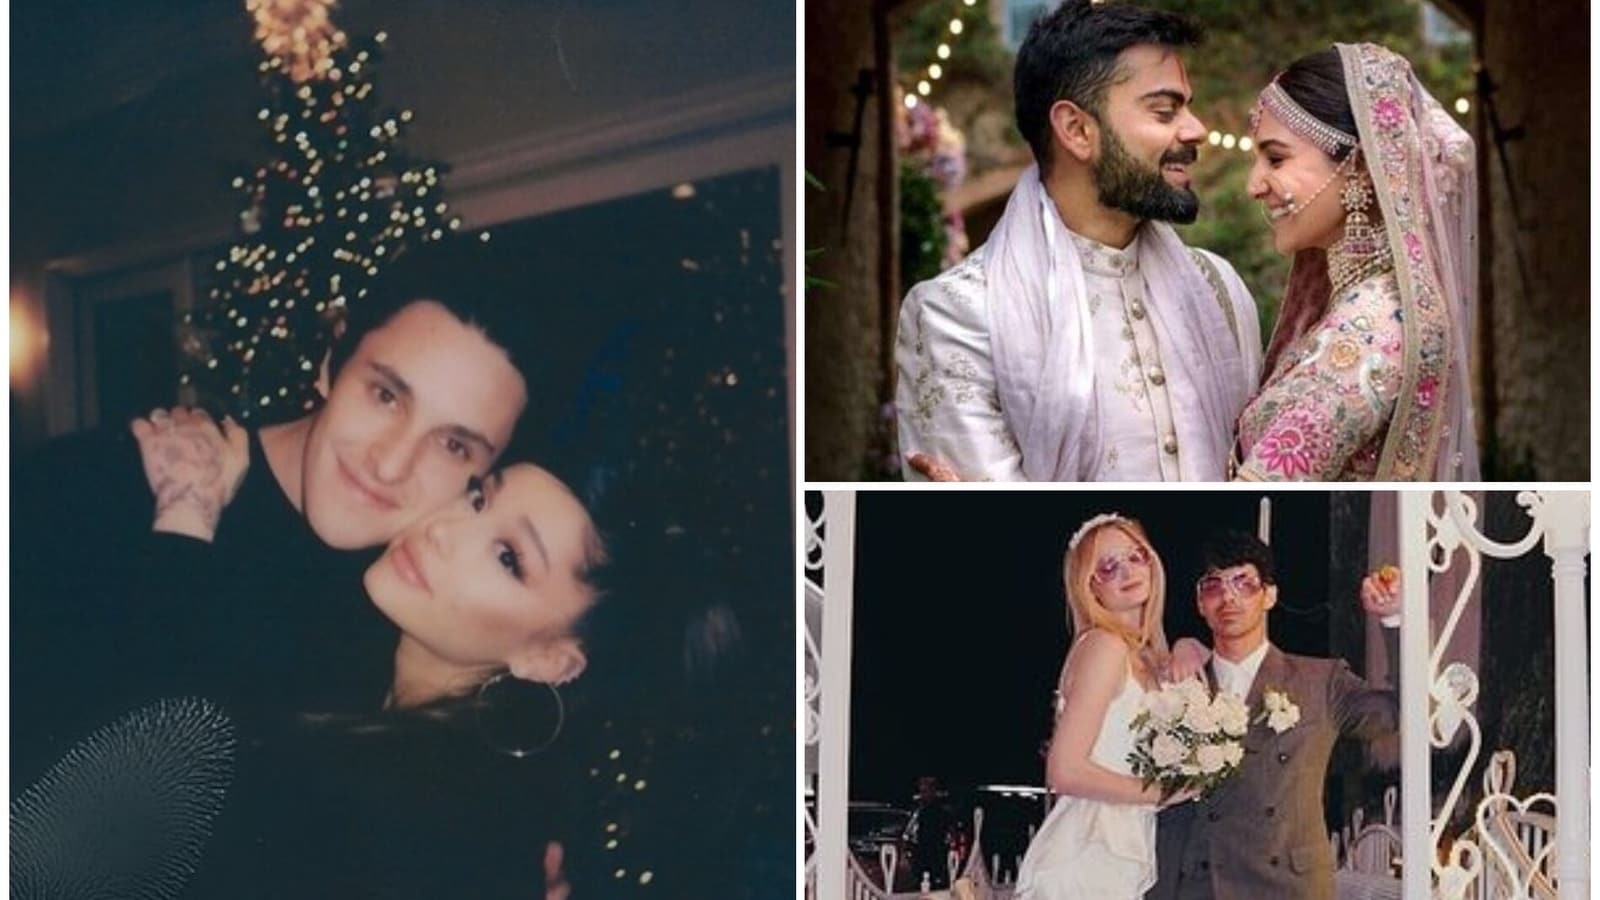 Getting in celebrities 2016 married Celebrity Couples: